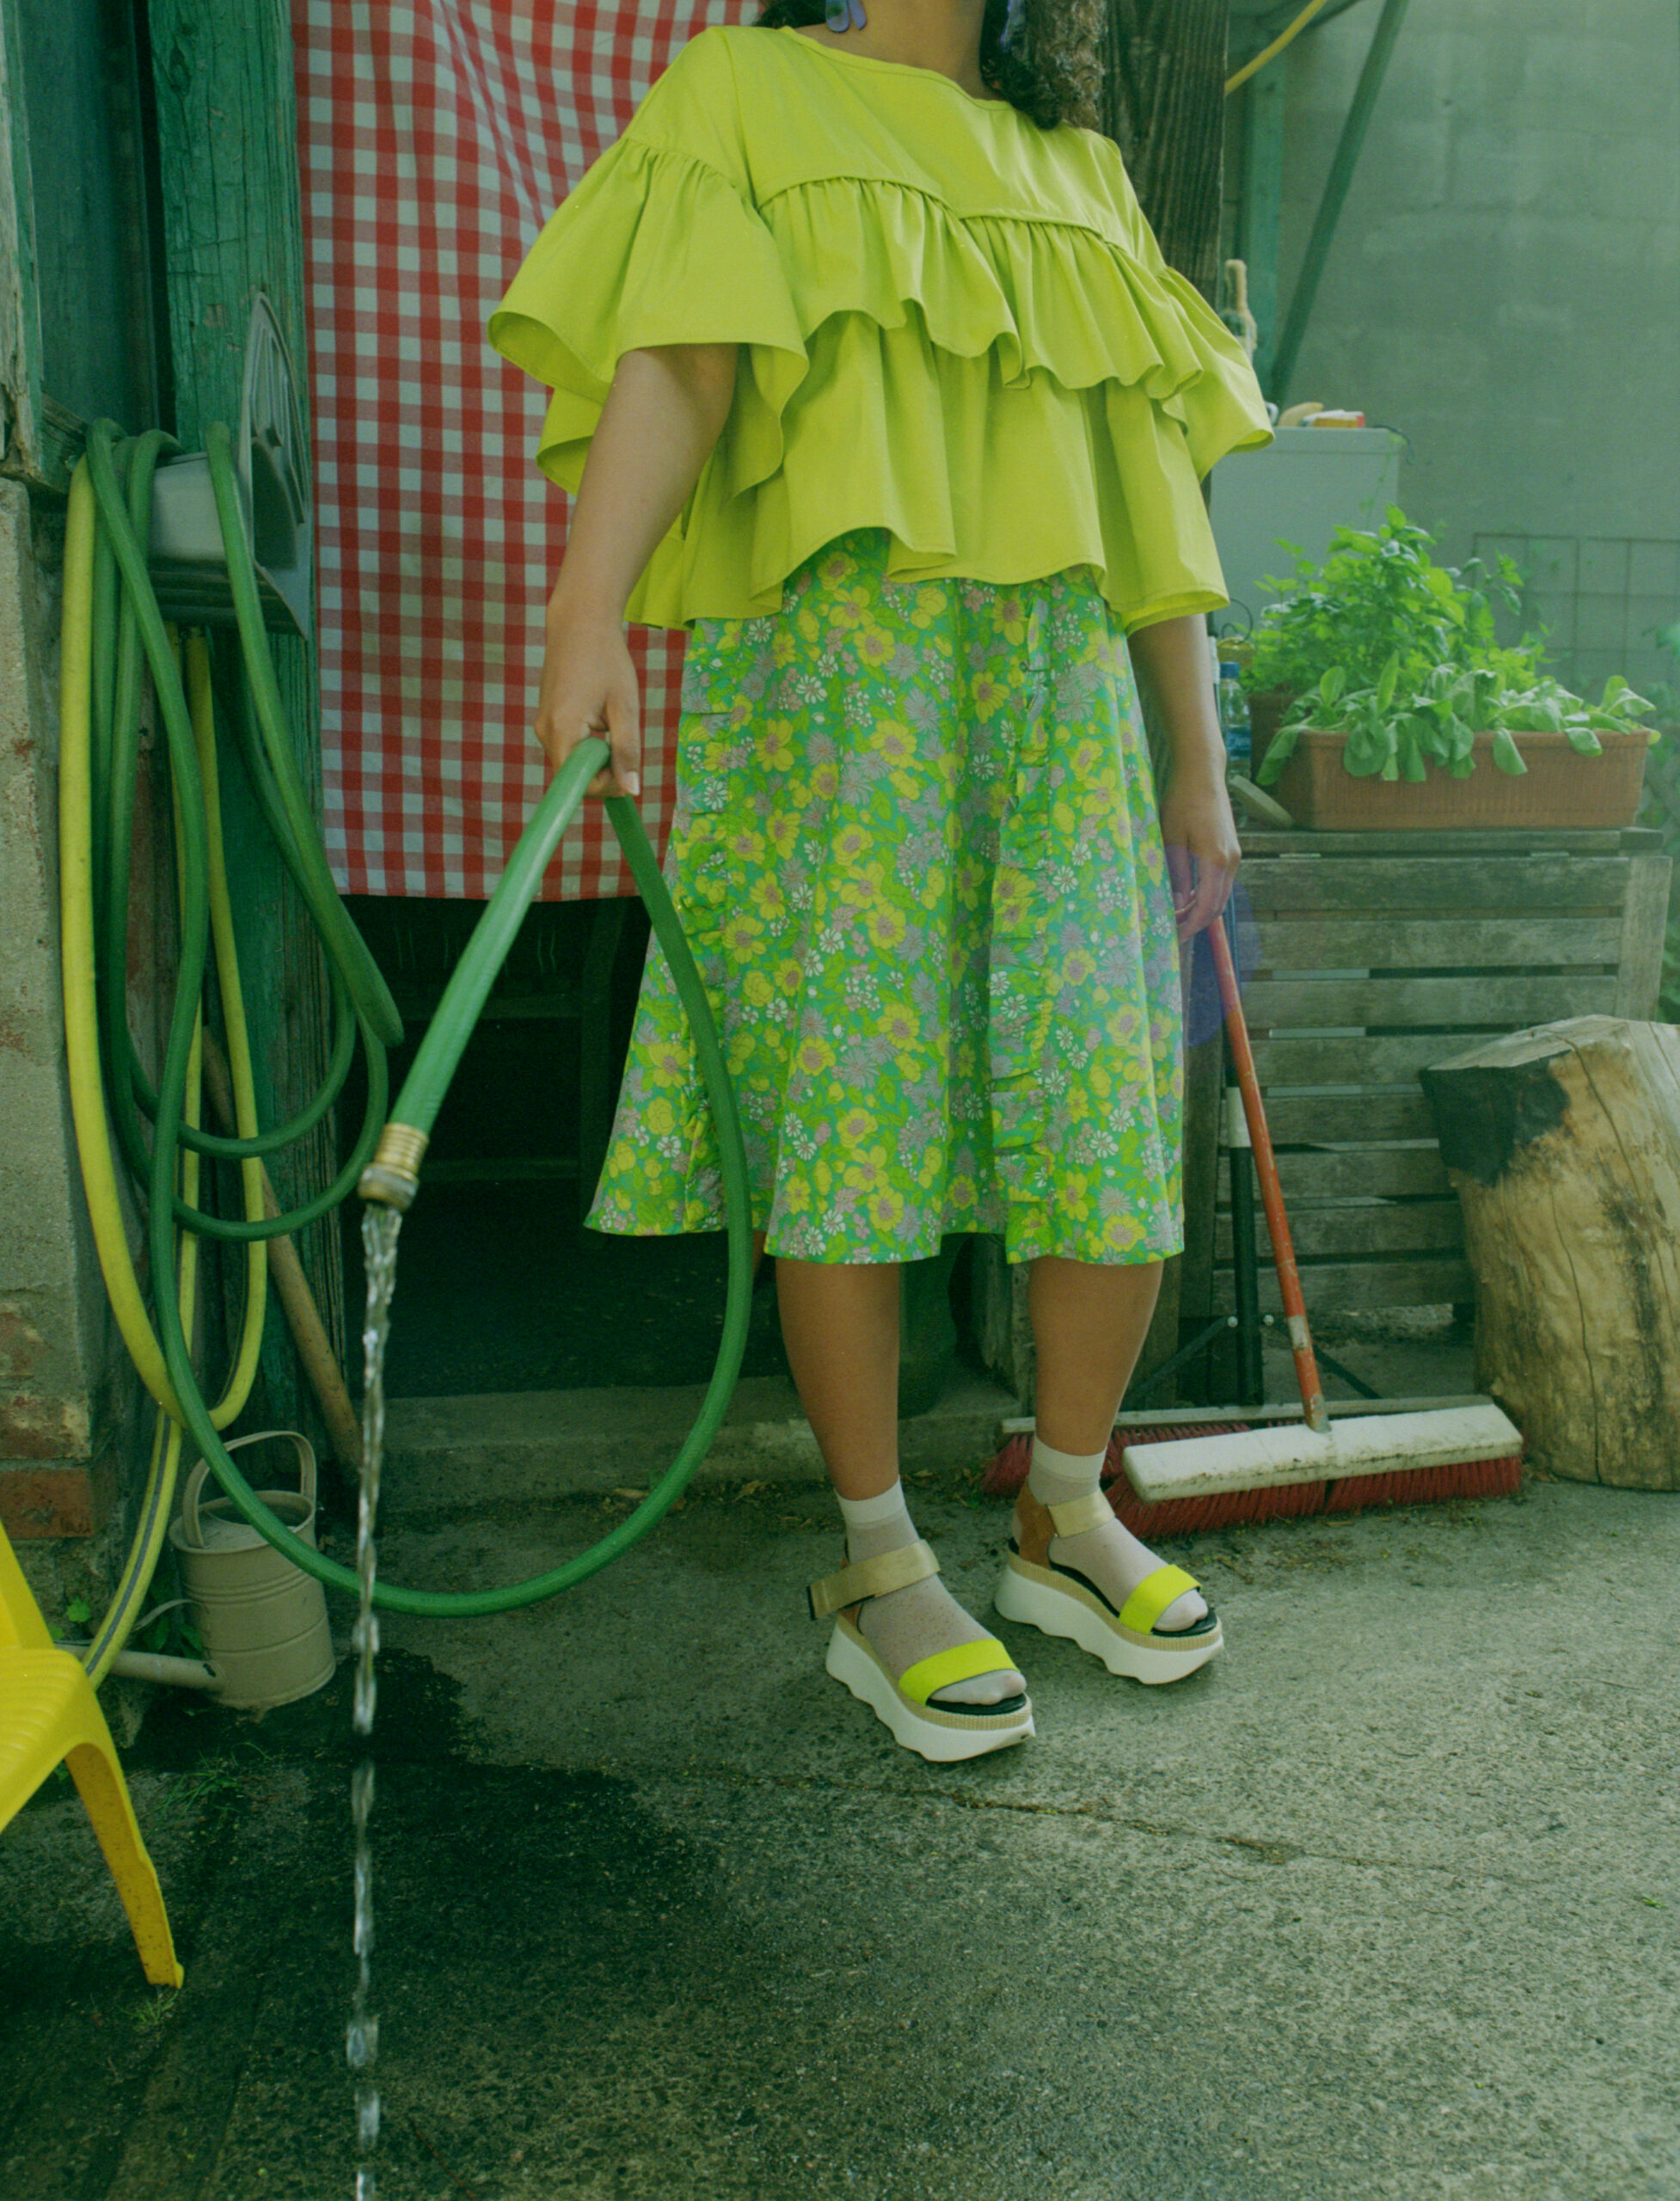 Green flower dress with hose. 